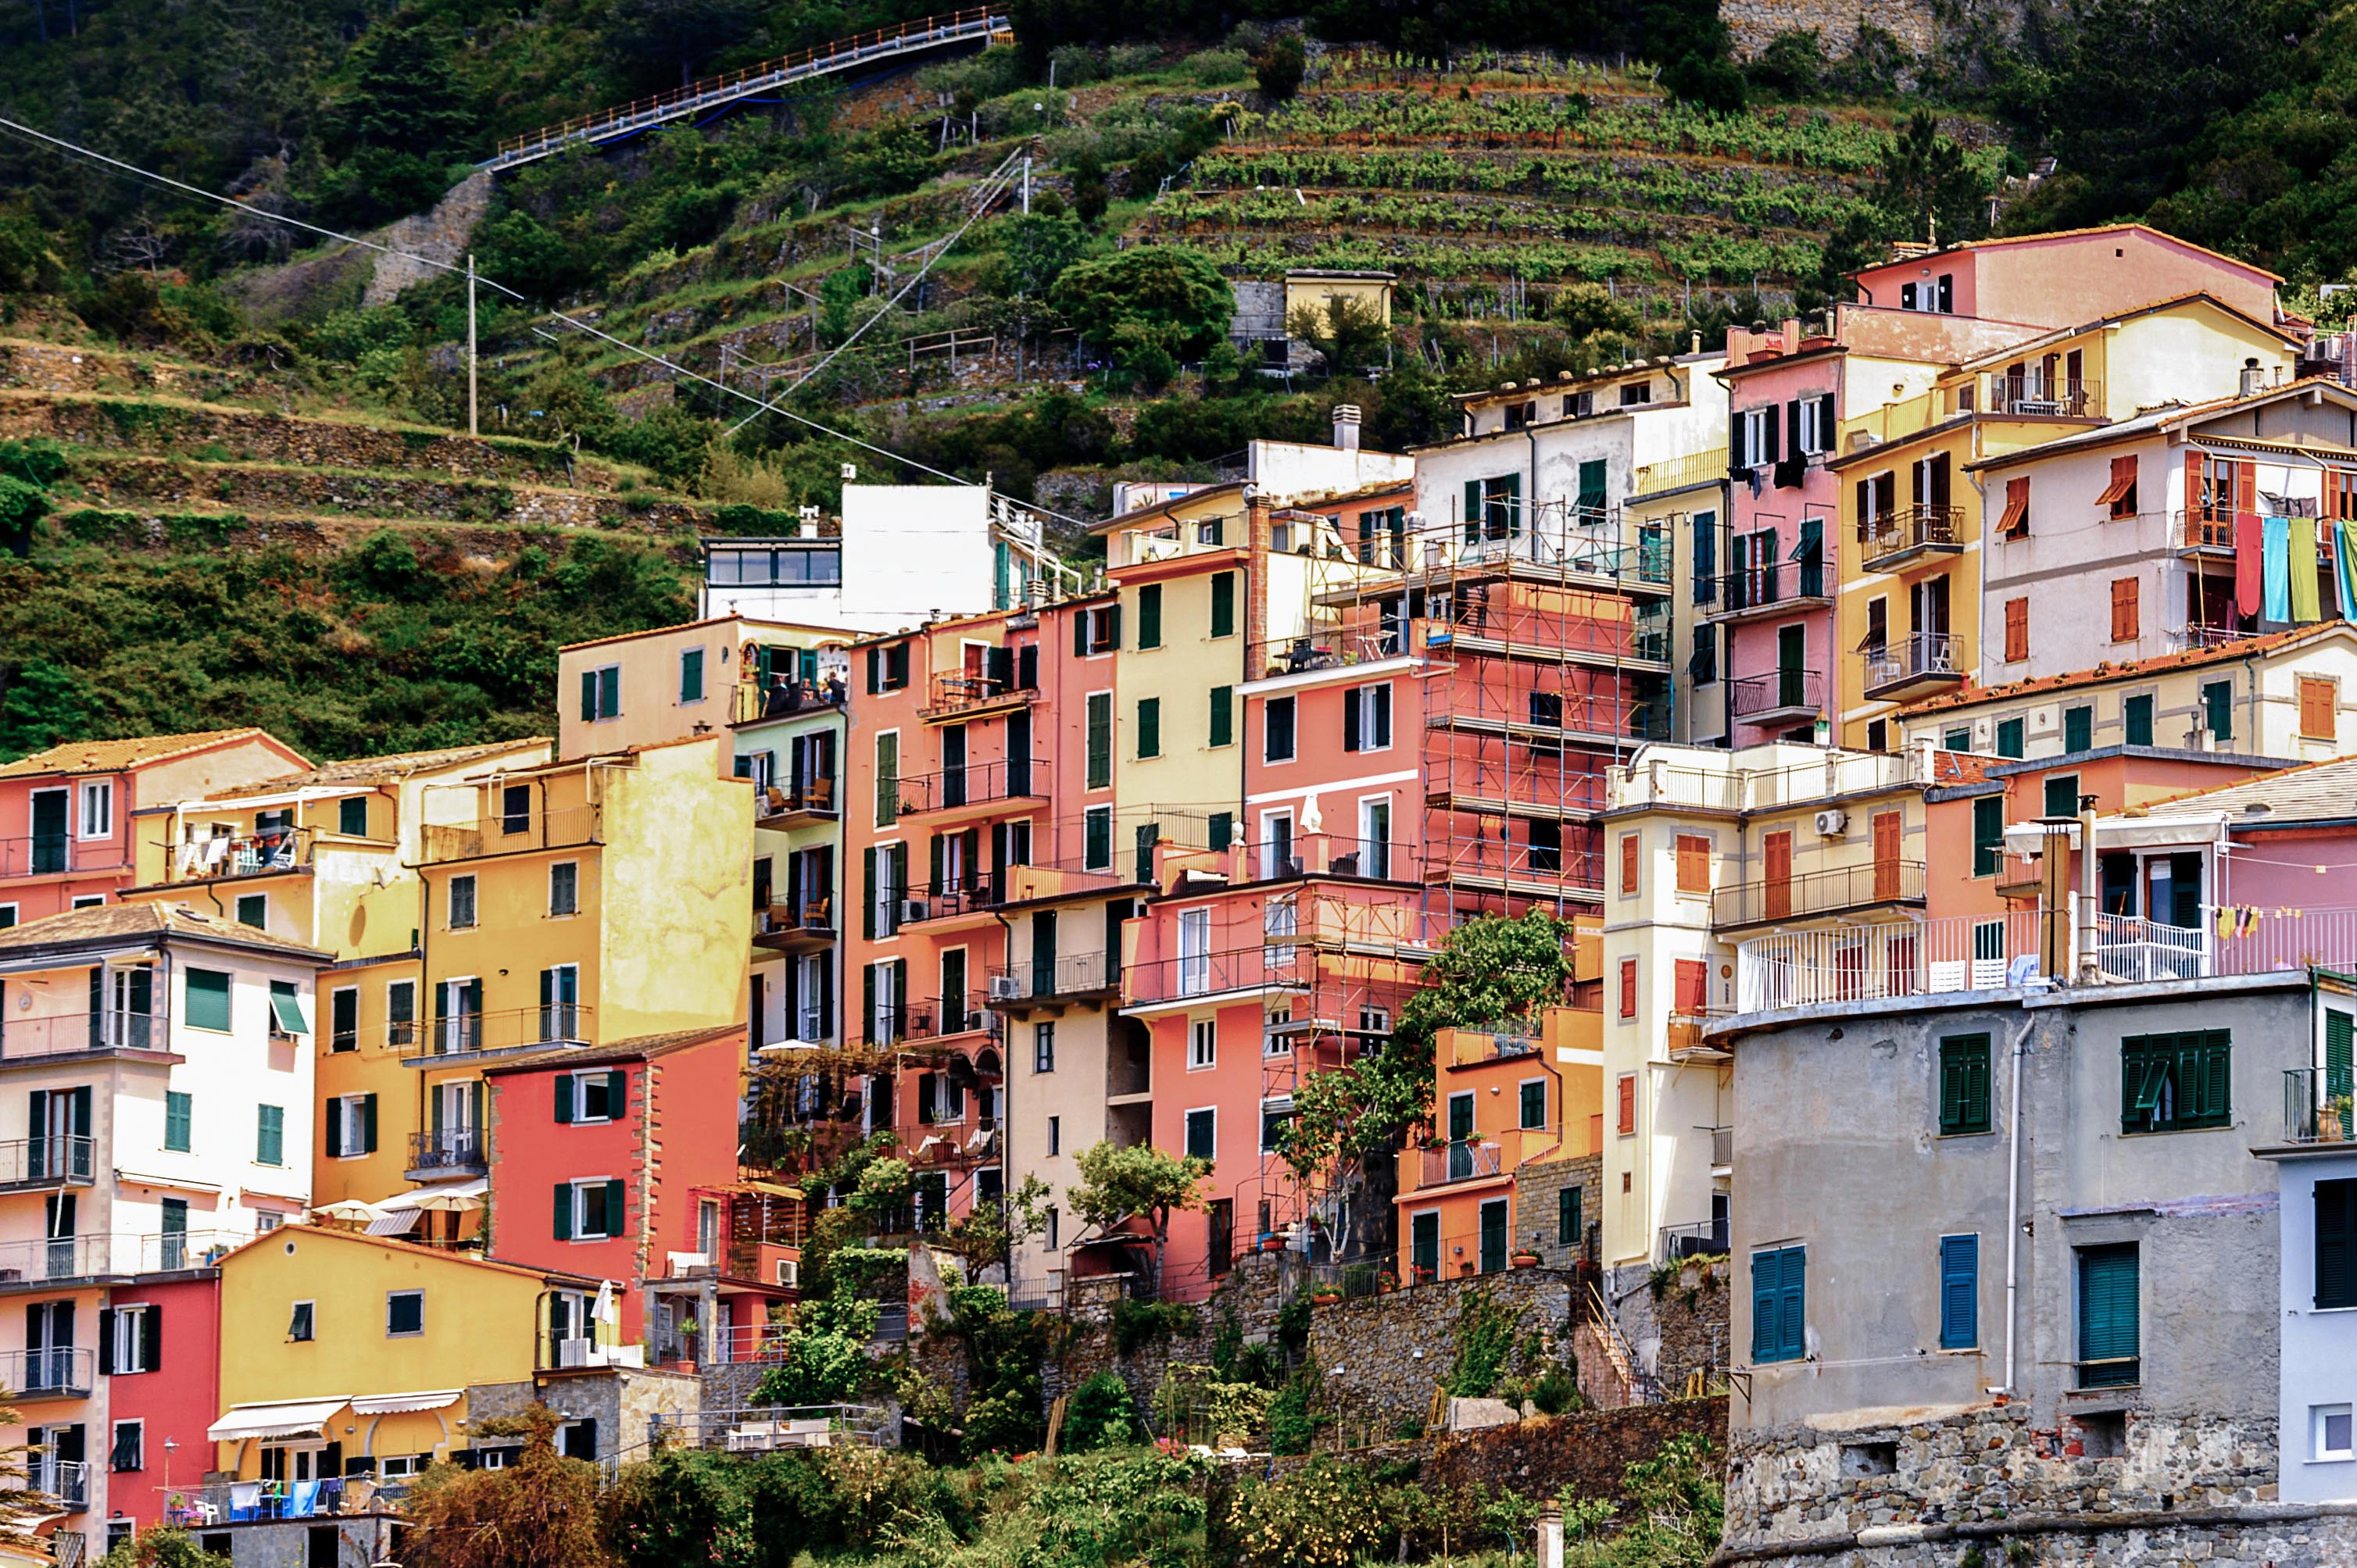 Houses dotted on a hillside Italy.